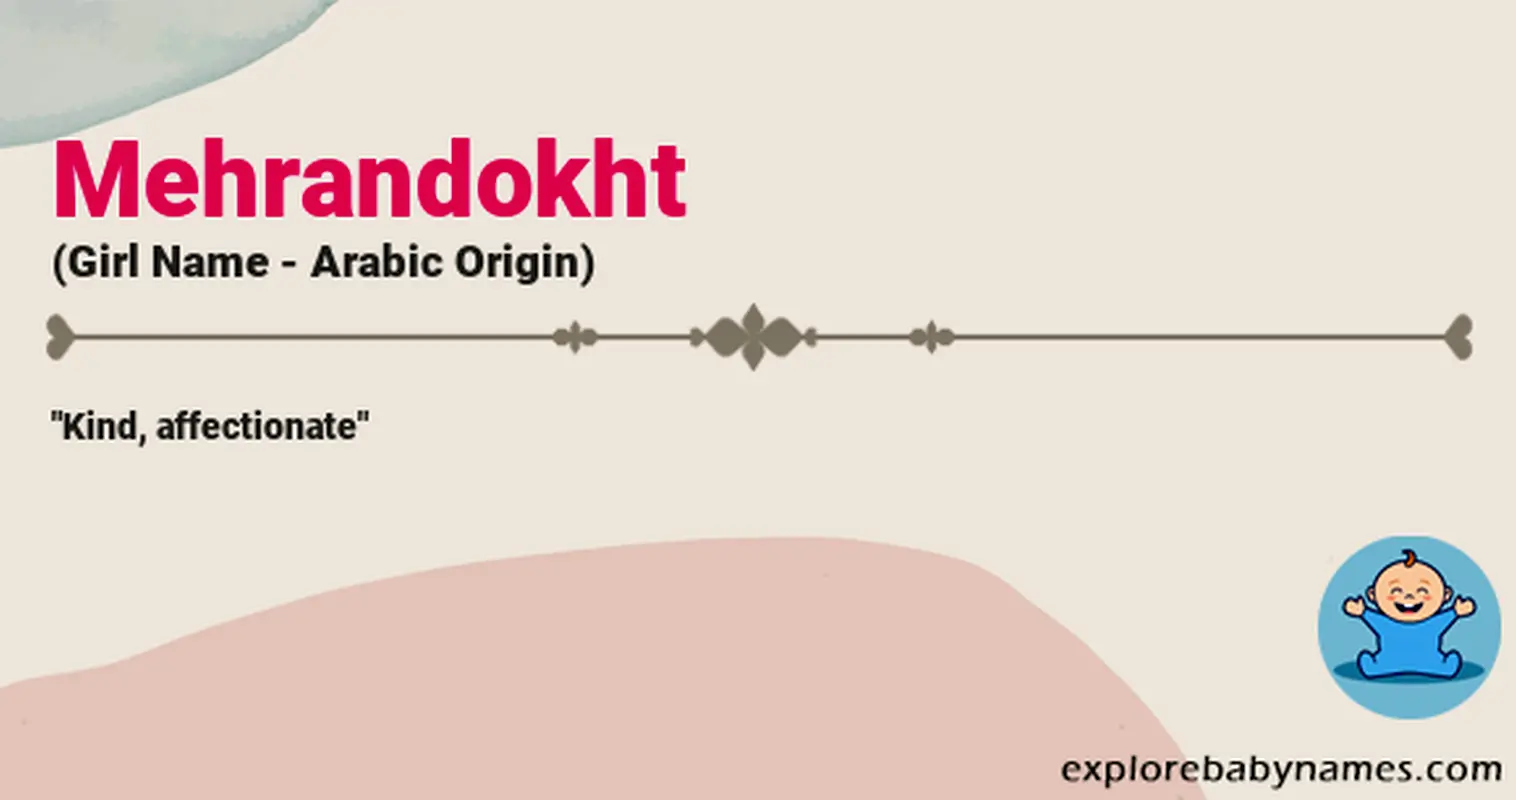 Meaning of Mehrandokht